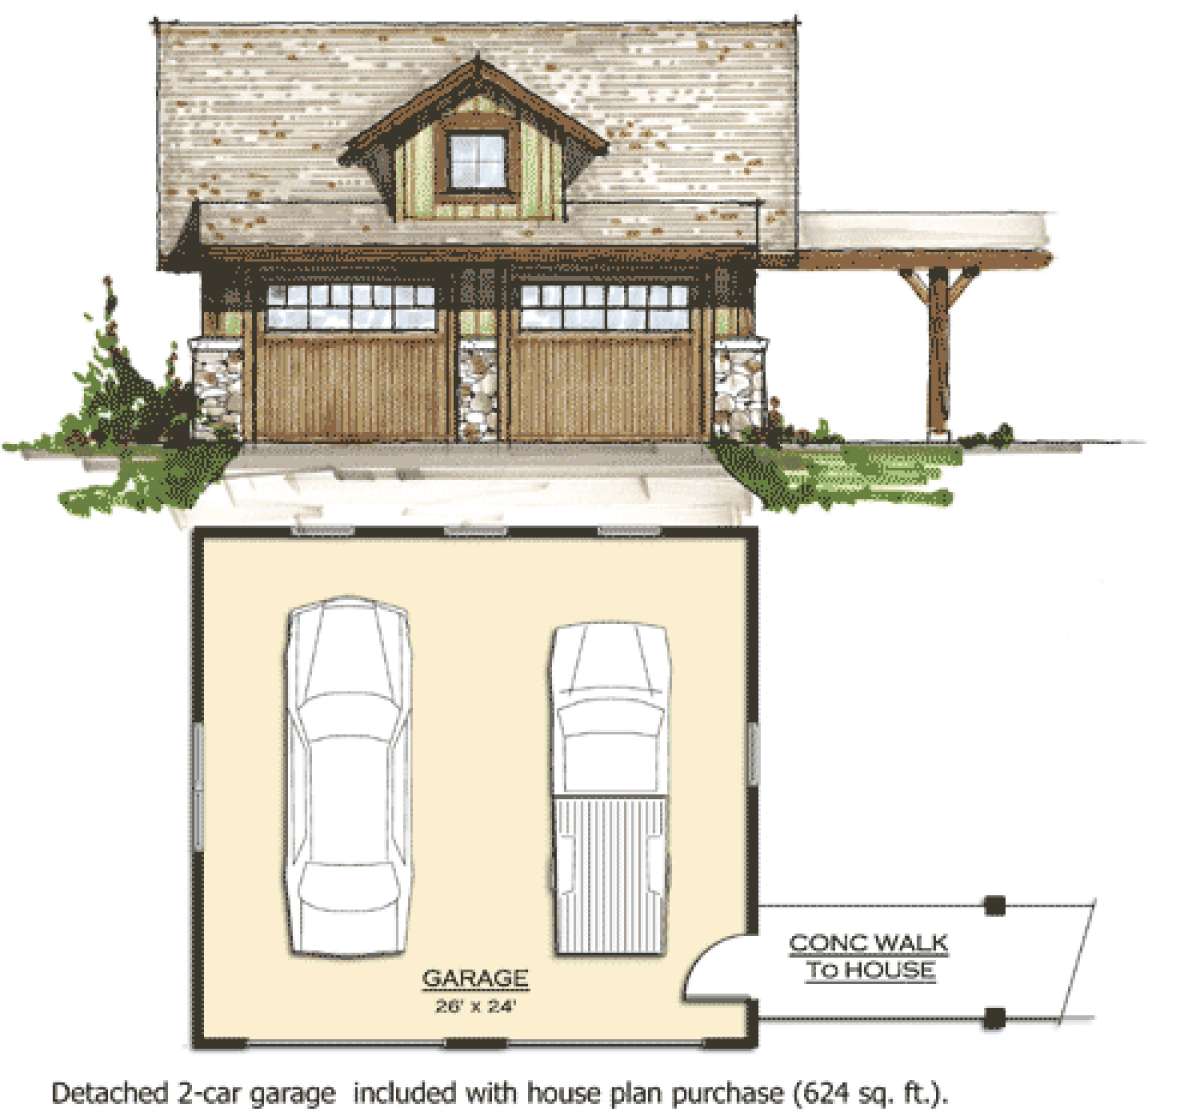 Garage for House Plan #8504-00053